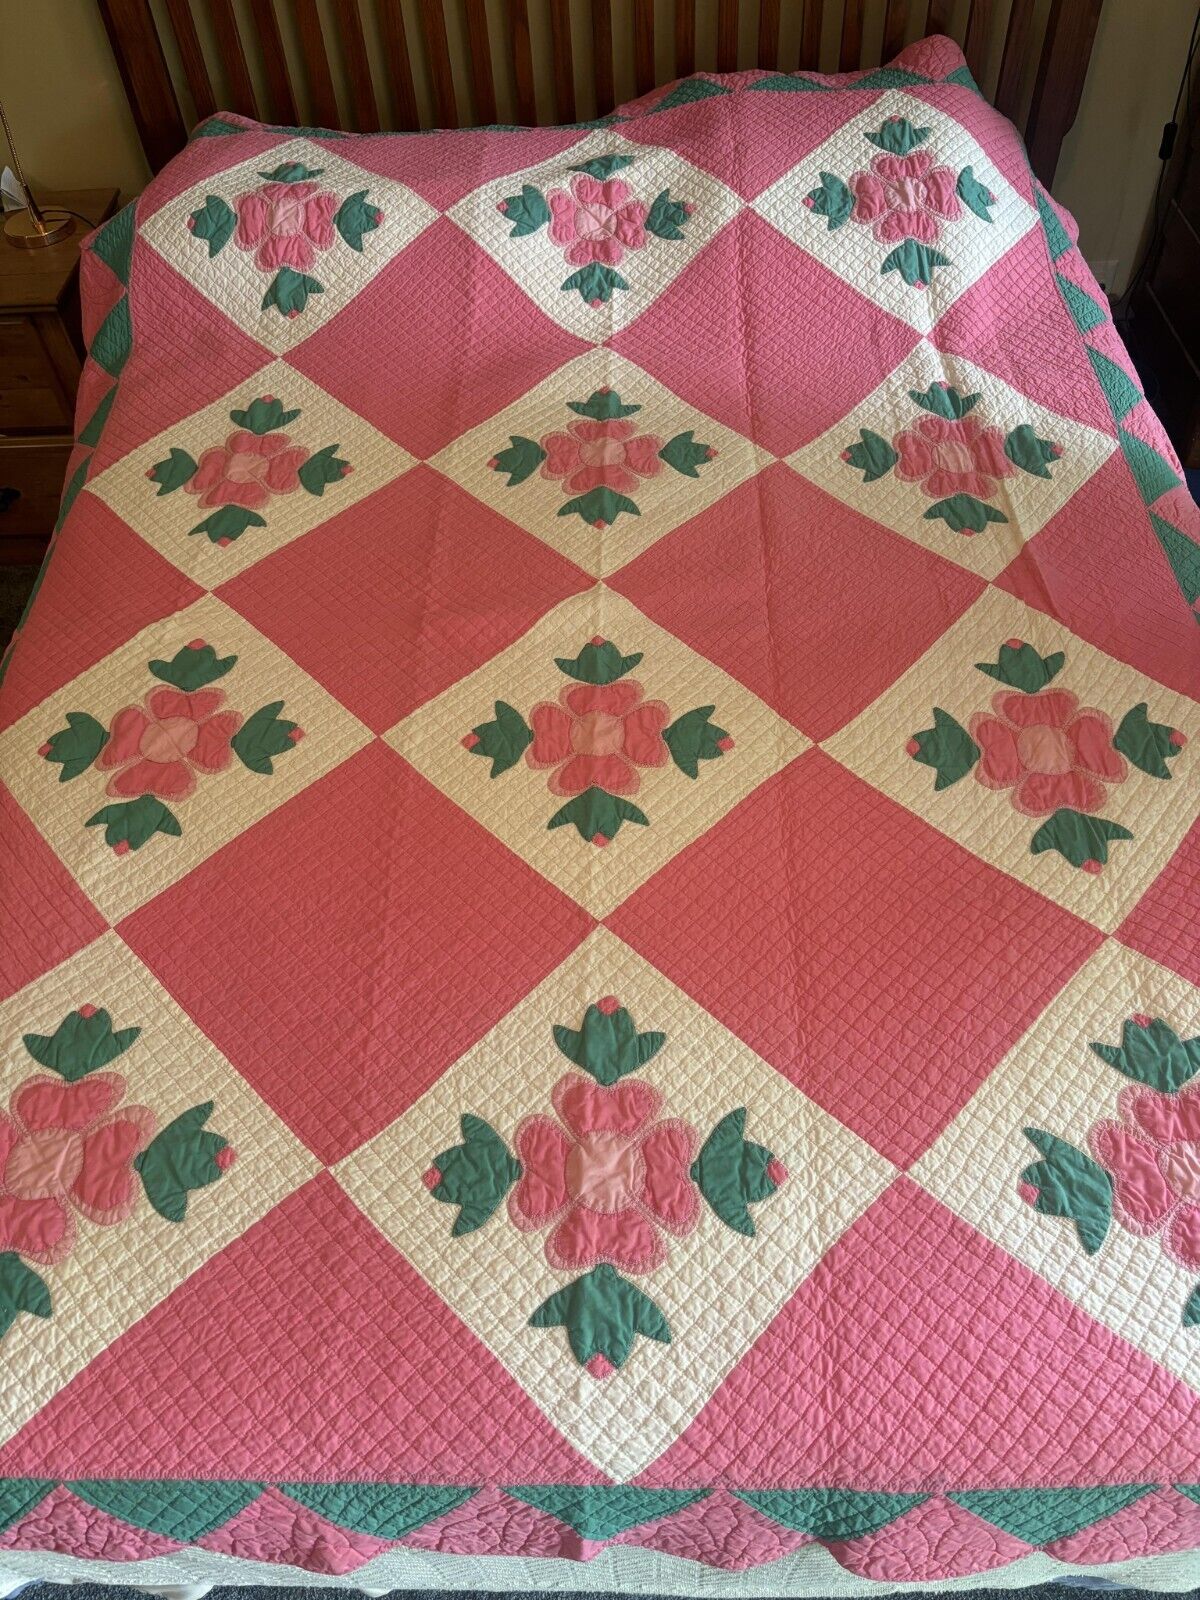 Stunning Vintage Hand Stitched Applique Quilt Pink Green Tulips Roses 89\